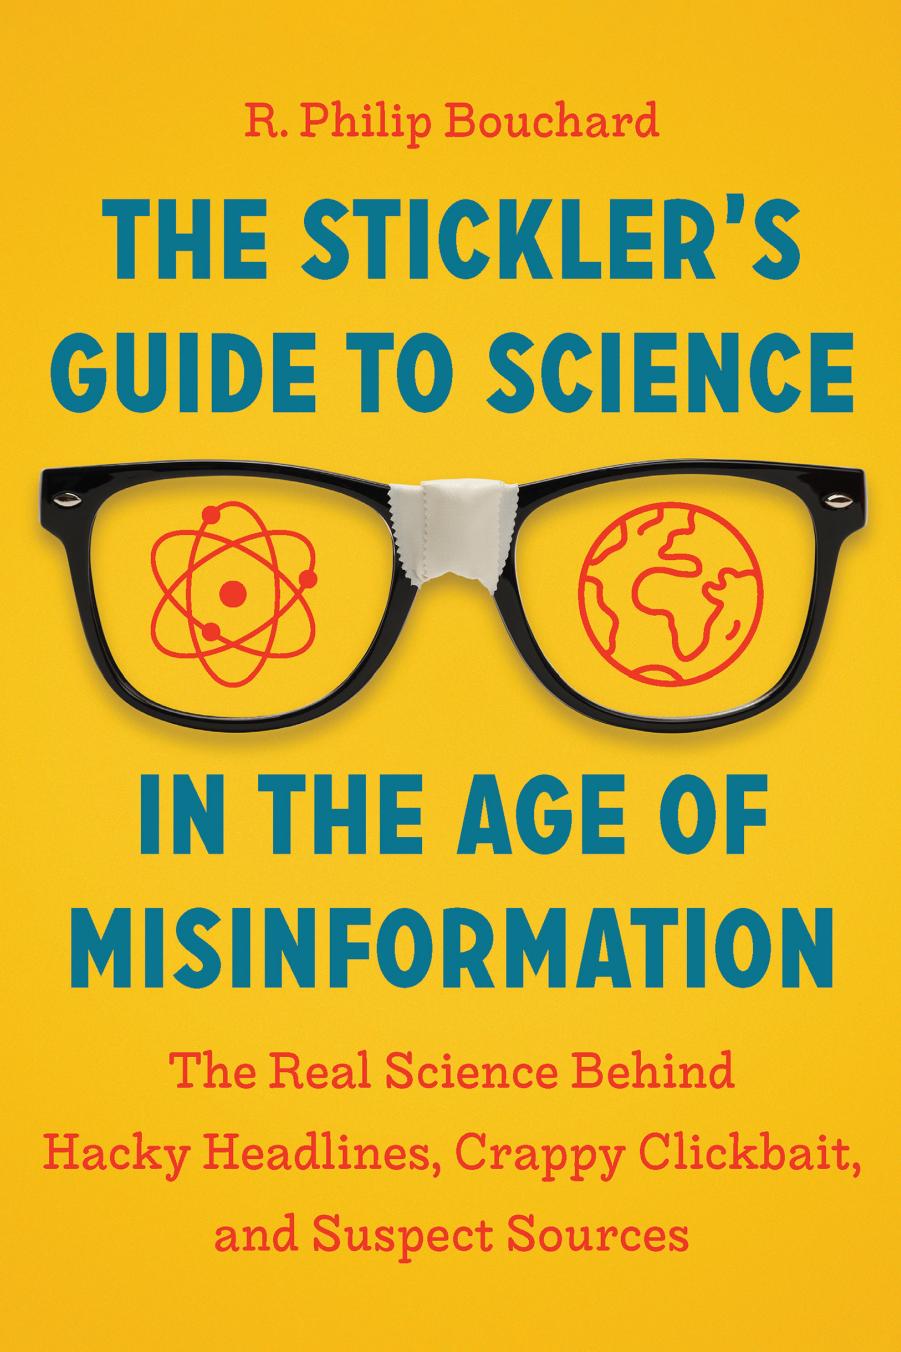 The Stickler's Guide to Science in the Age of Misinformation by R. Philip Bouchard